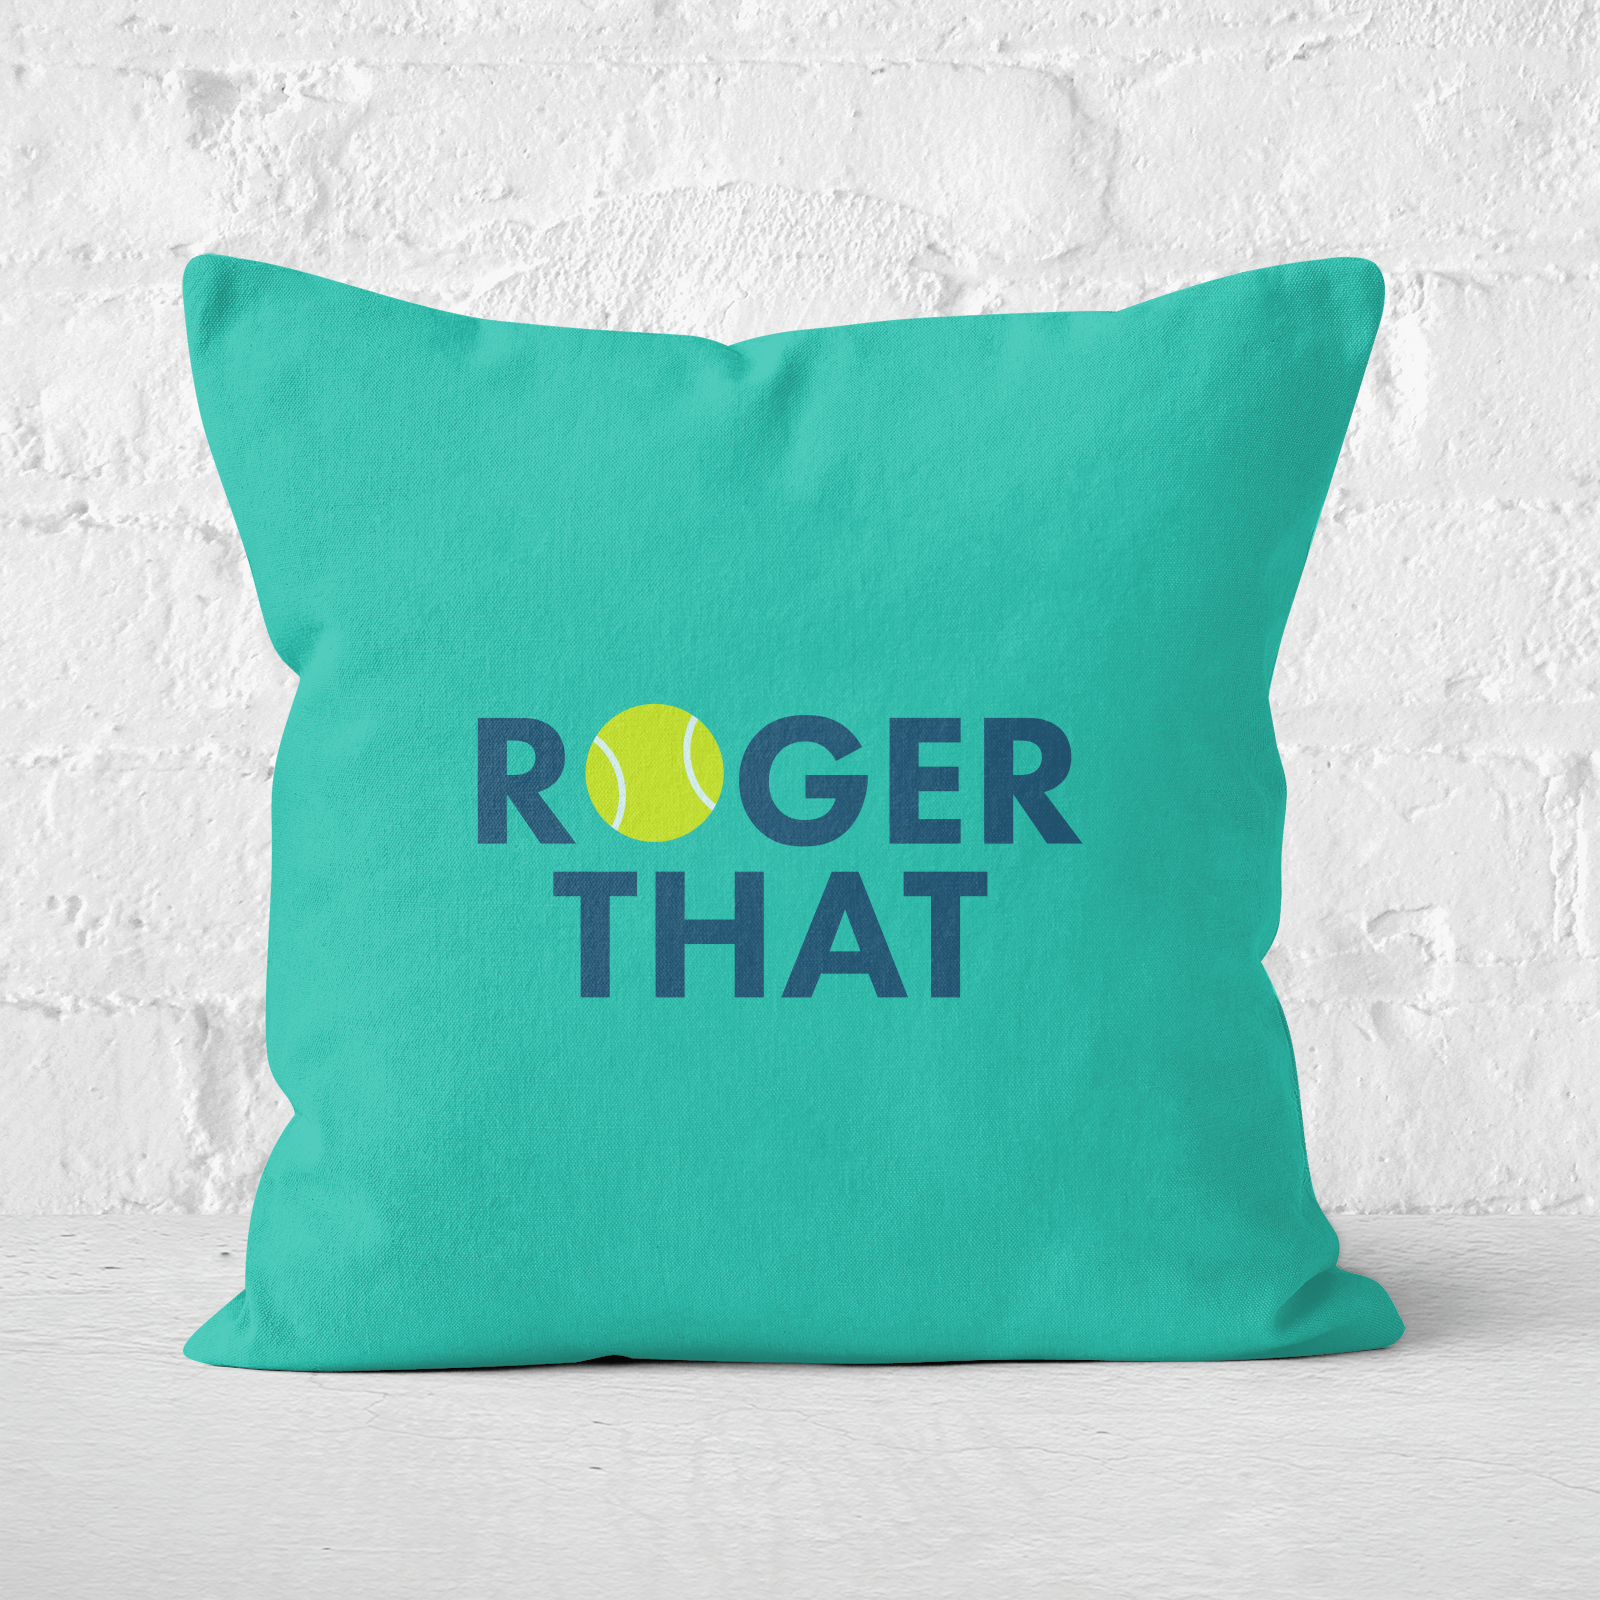 Roger That Square Cushion   60x60cm   Soft Touch